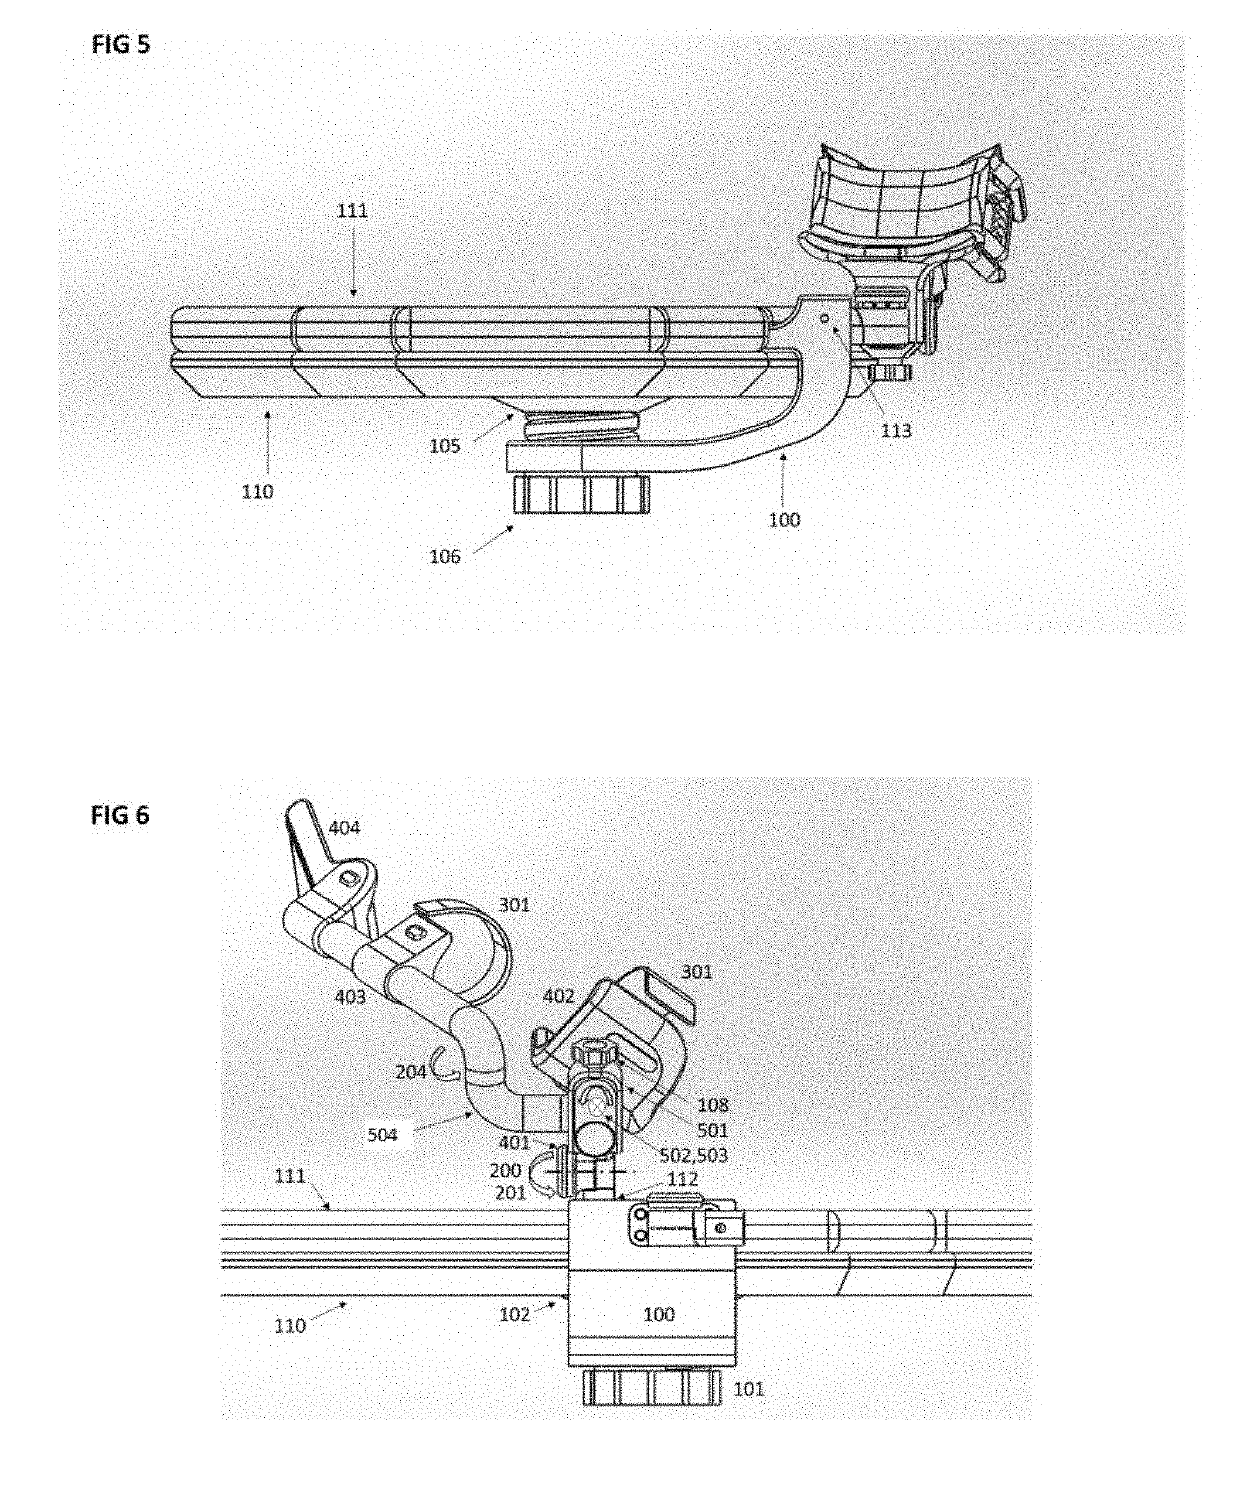 Upper Extremity Radial Artery Procedure Support Device And Associated Warming Sleeve